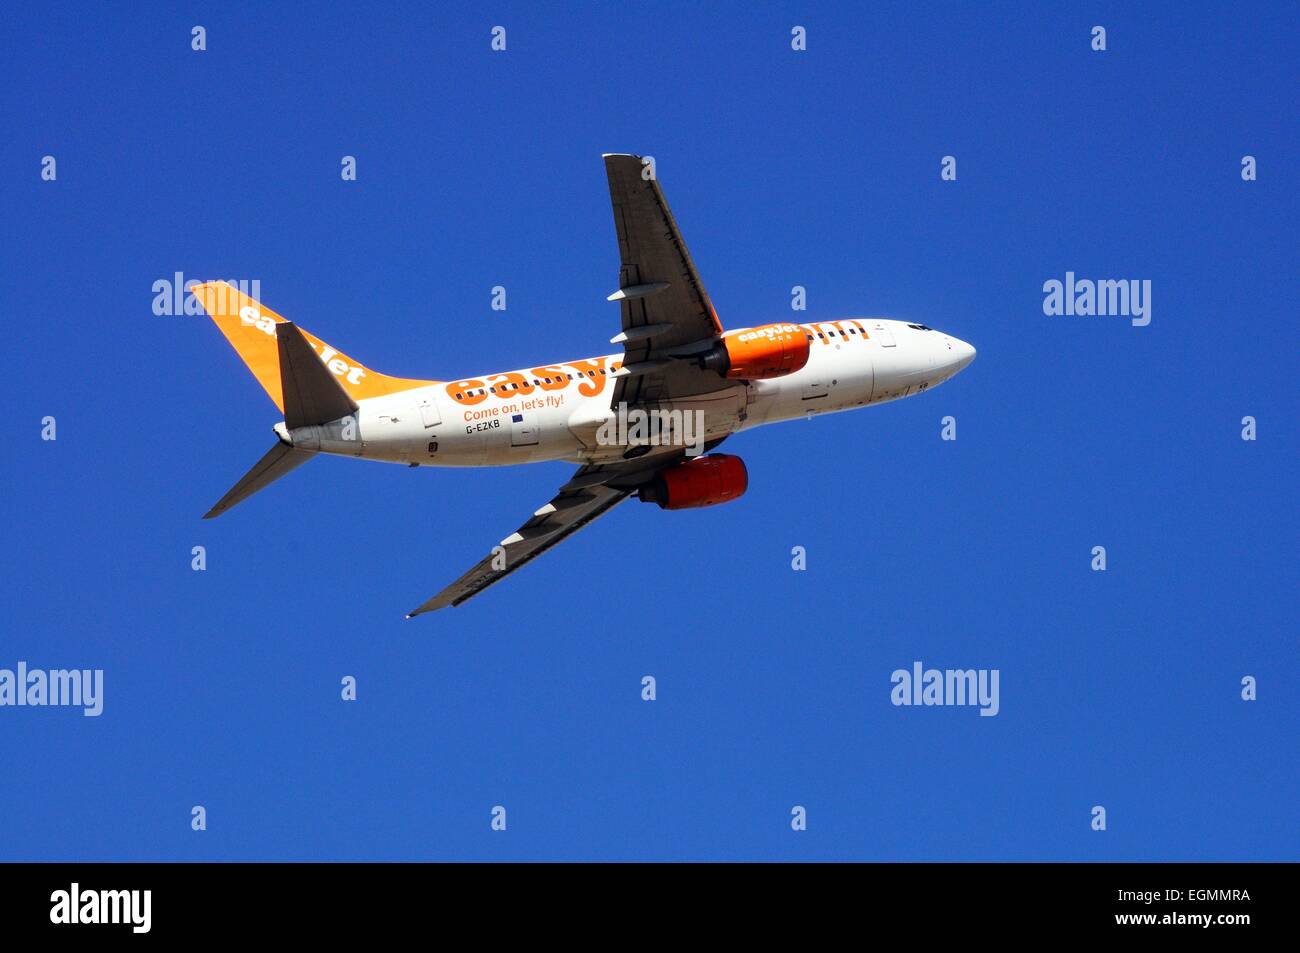 Easyjet Boeing 737-700 taking off against a blue sky. Stock Photo